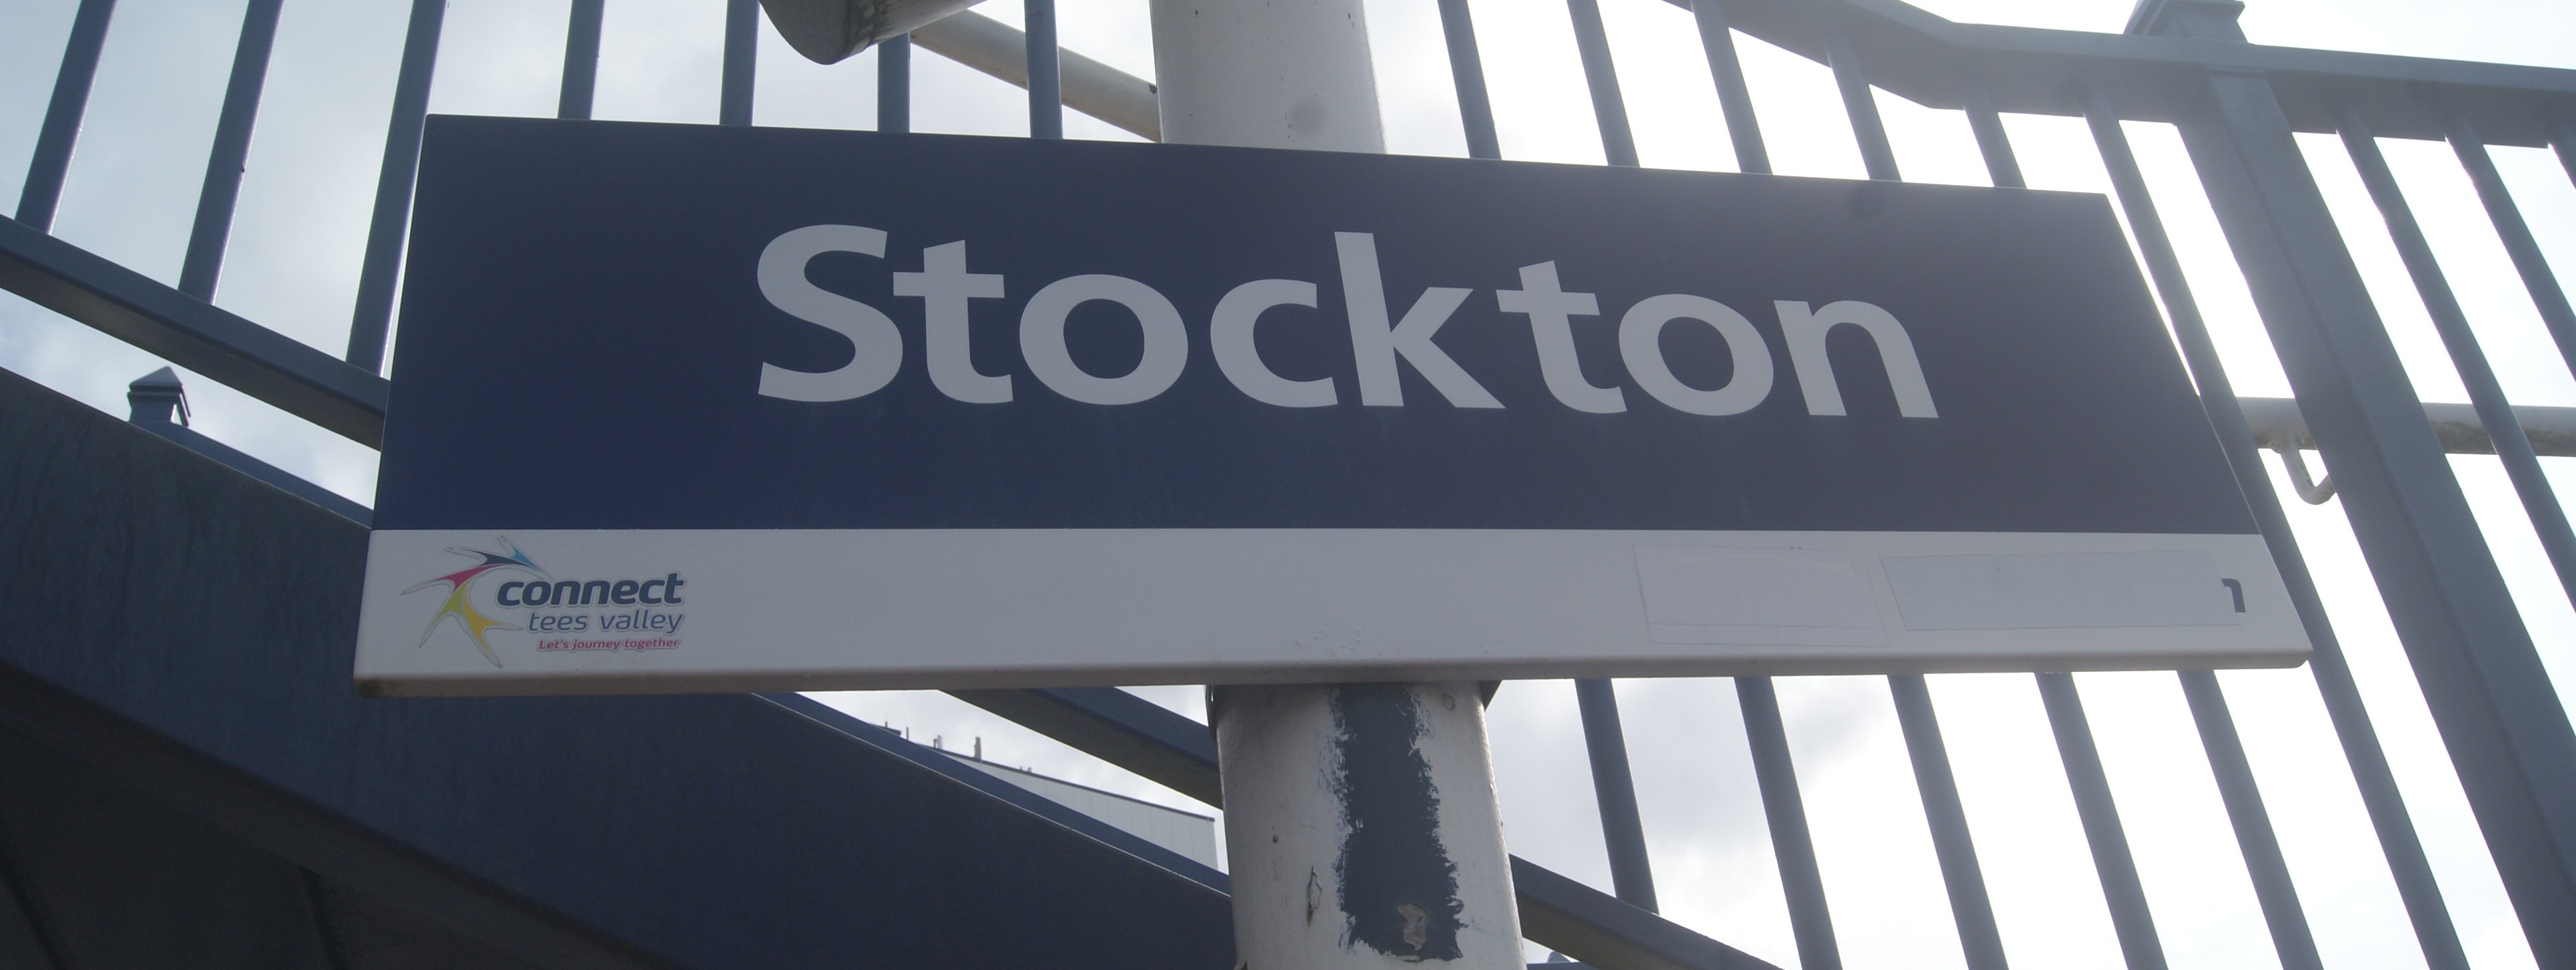 this-image-shows-the-blue-and-white-stockton-station-sign